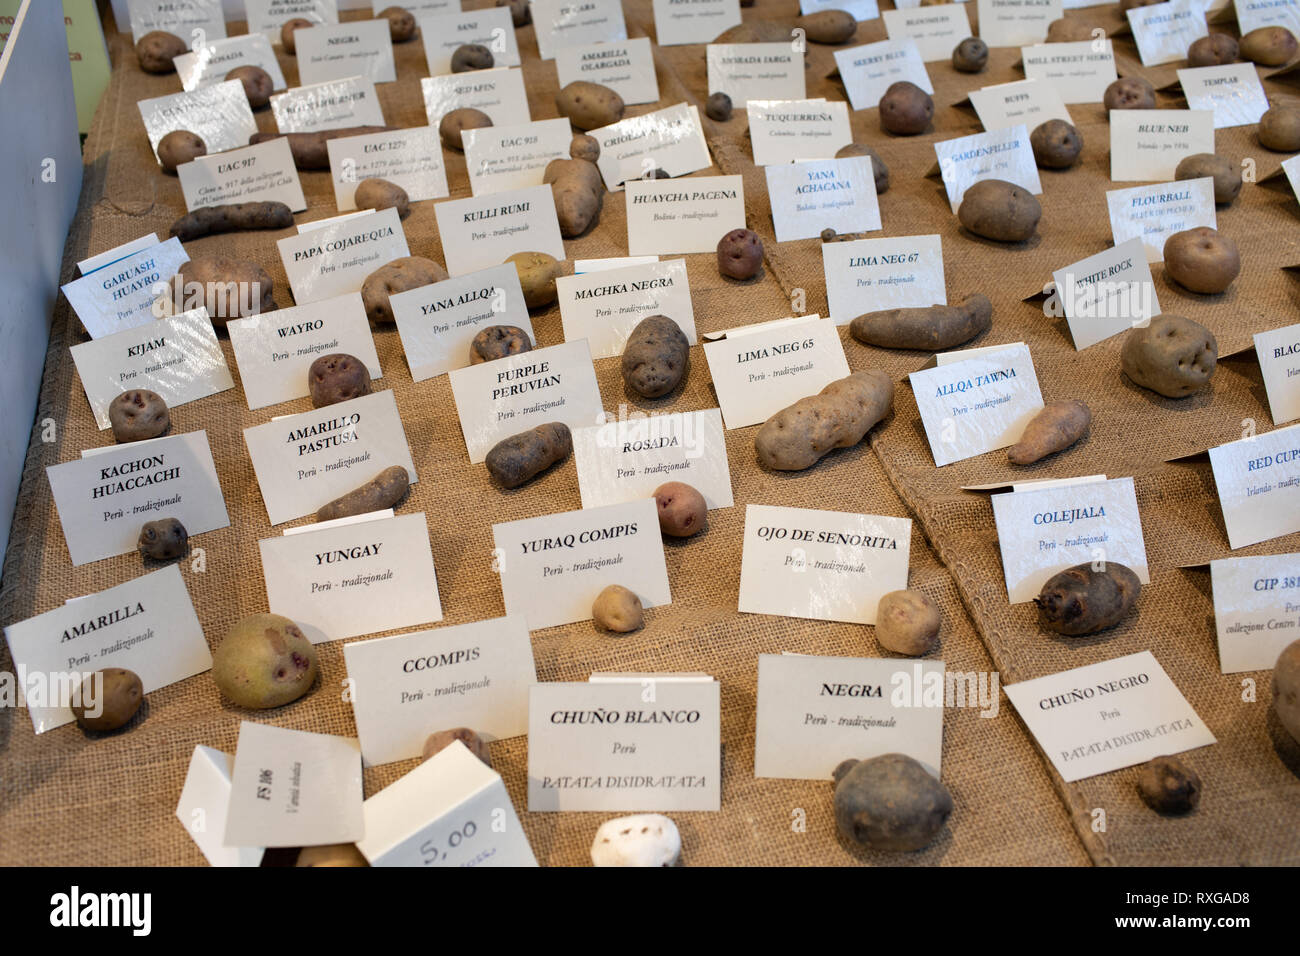 ROME, ITALY - FEBRUARY 17, 2019: Potato varieties from different countries of the world in an exhibition at Eataly in Rome for the Potato Feast. Stock Photo